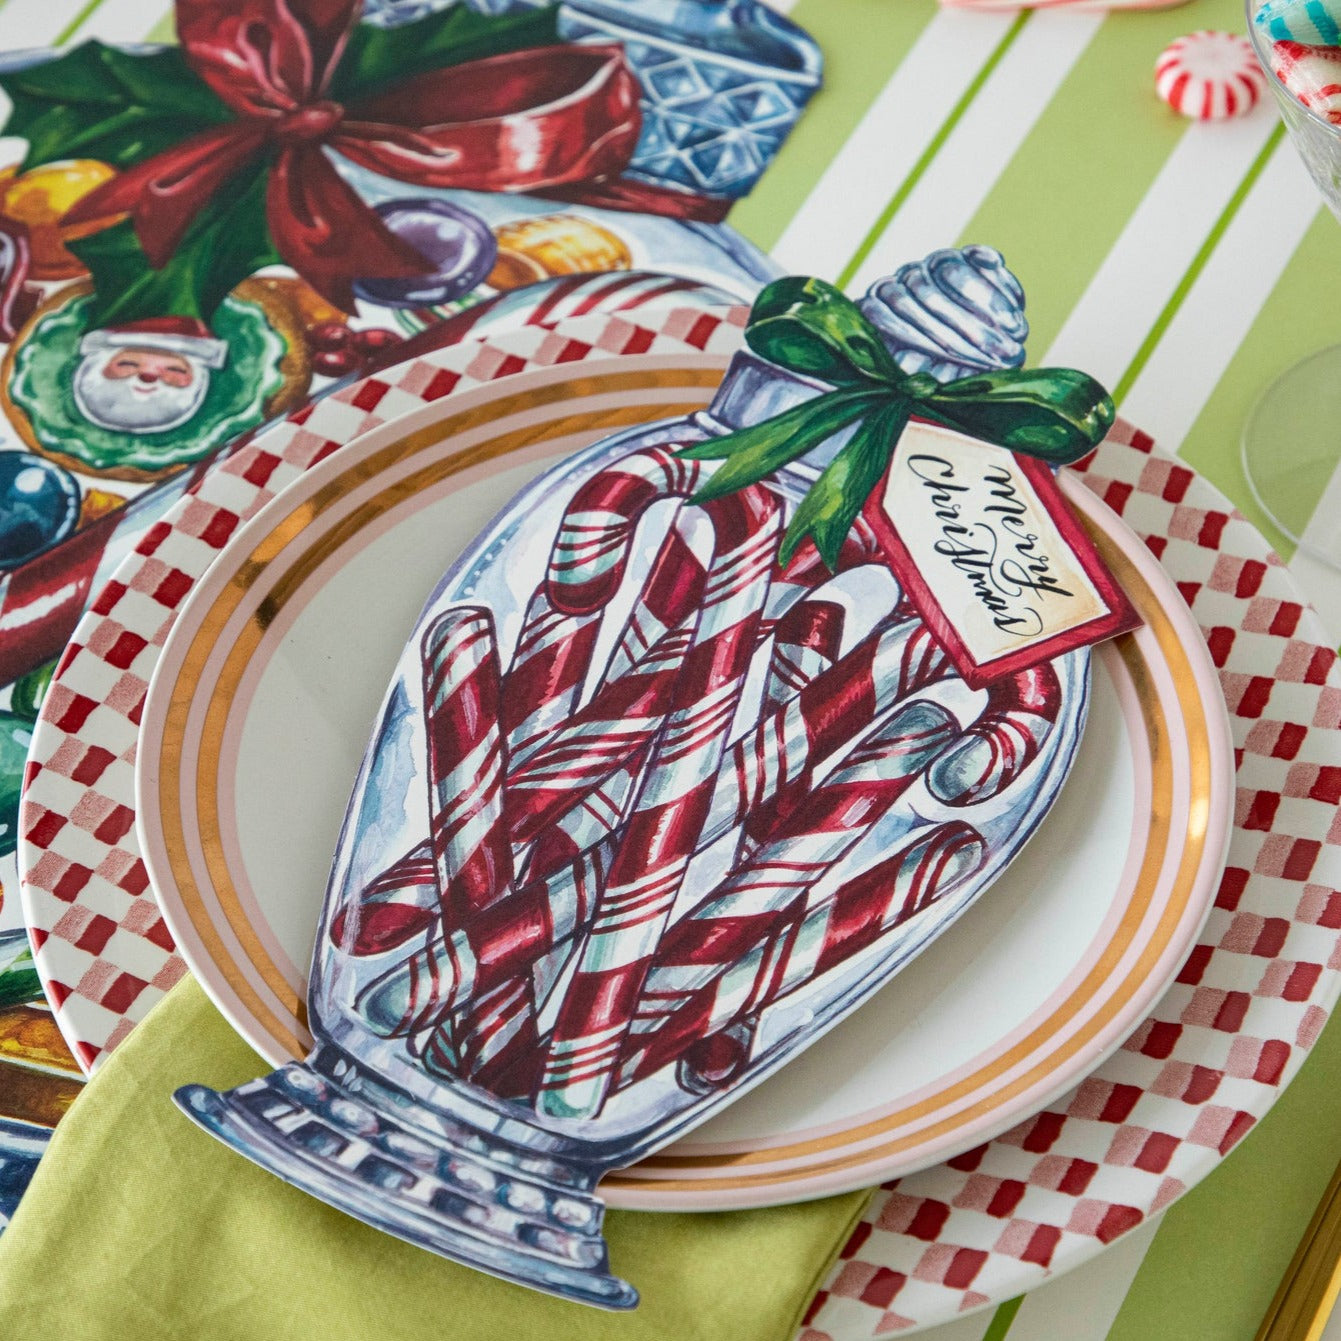 A festive Christmas place setting featuring a Candy Cane Jar Table Accent with &quot;Merry Christmas&quot; written on the tag resting on the plate.